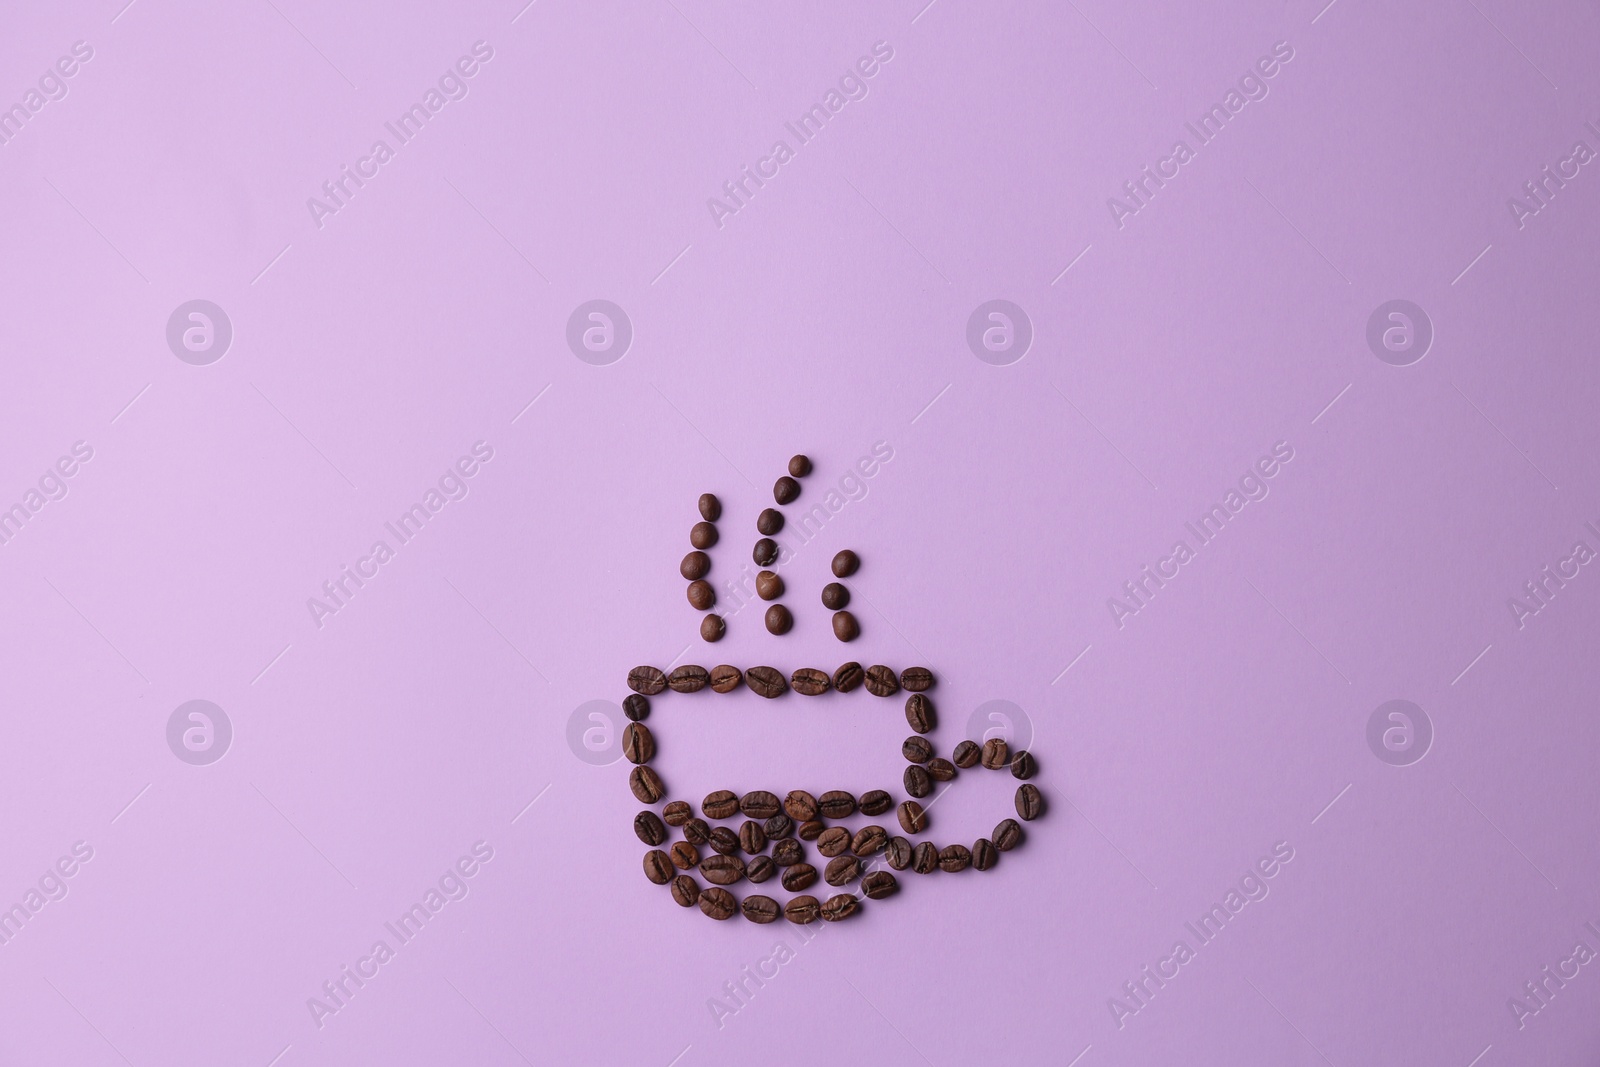 Photo of Cup made of coffee beans on lilac background, flat lay